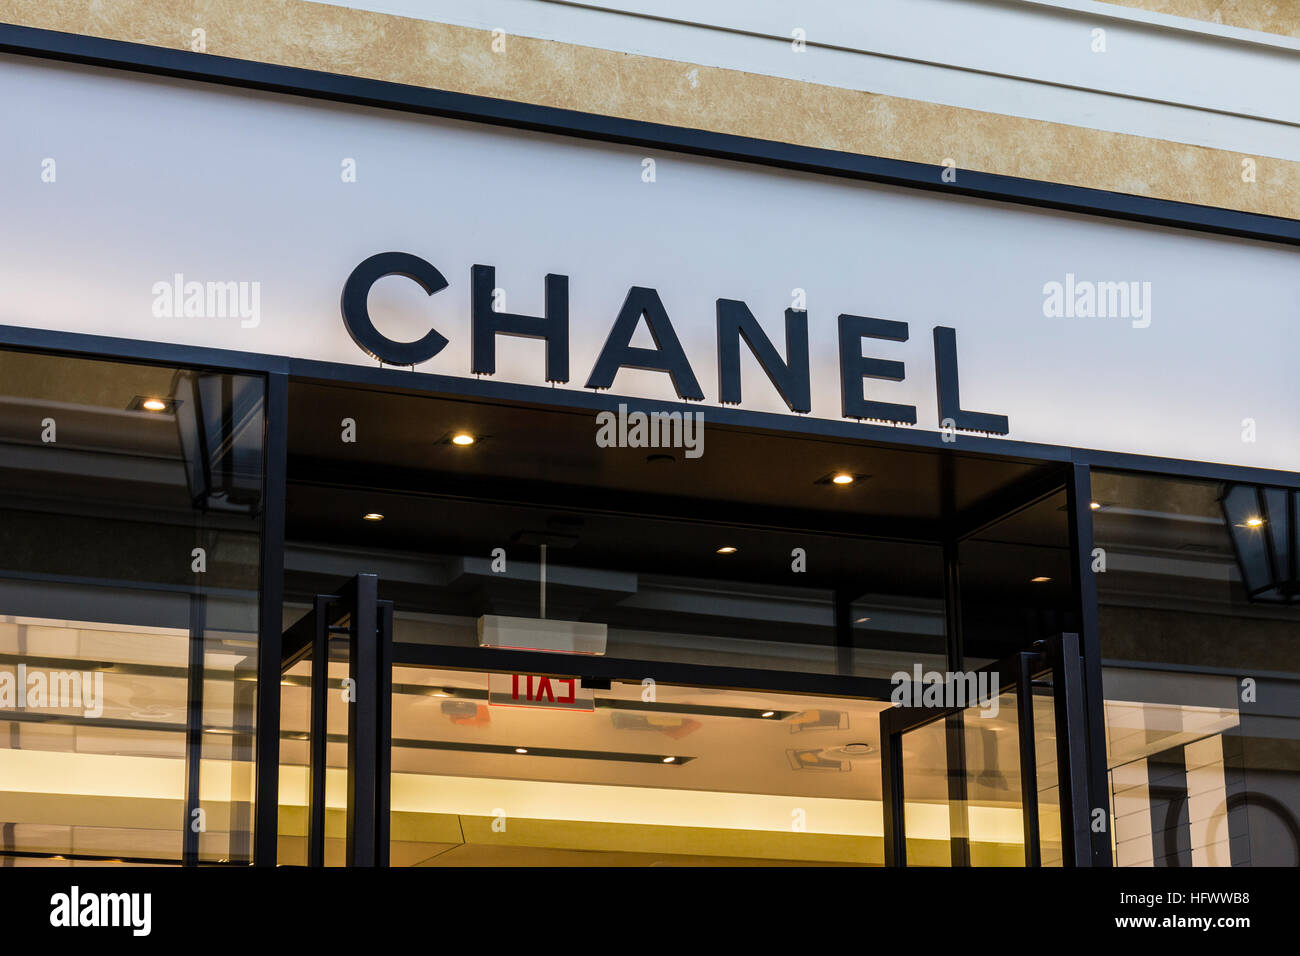 Las Vegas - Circa December 2016: Chanel Retail Mall Location. Chanel is widely known for its high-end fashions II Stock Photo